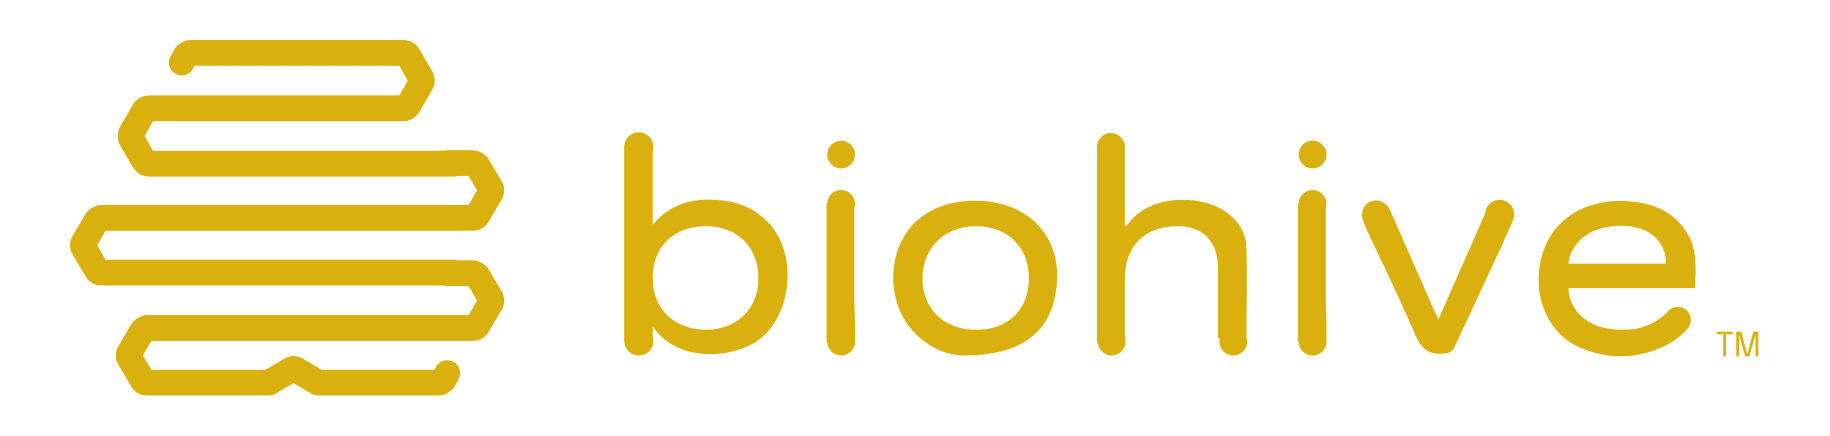 BioHive to launch He